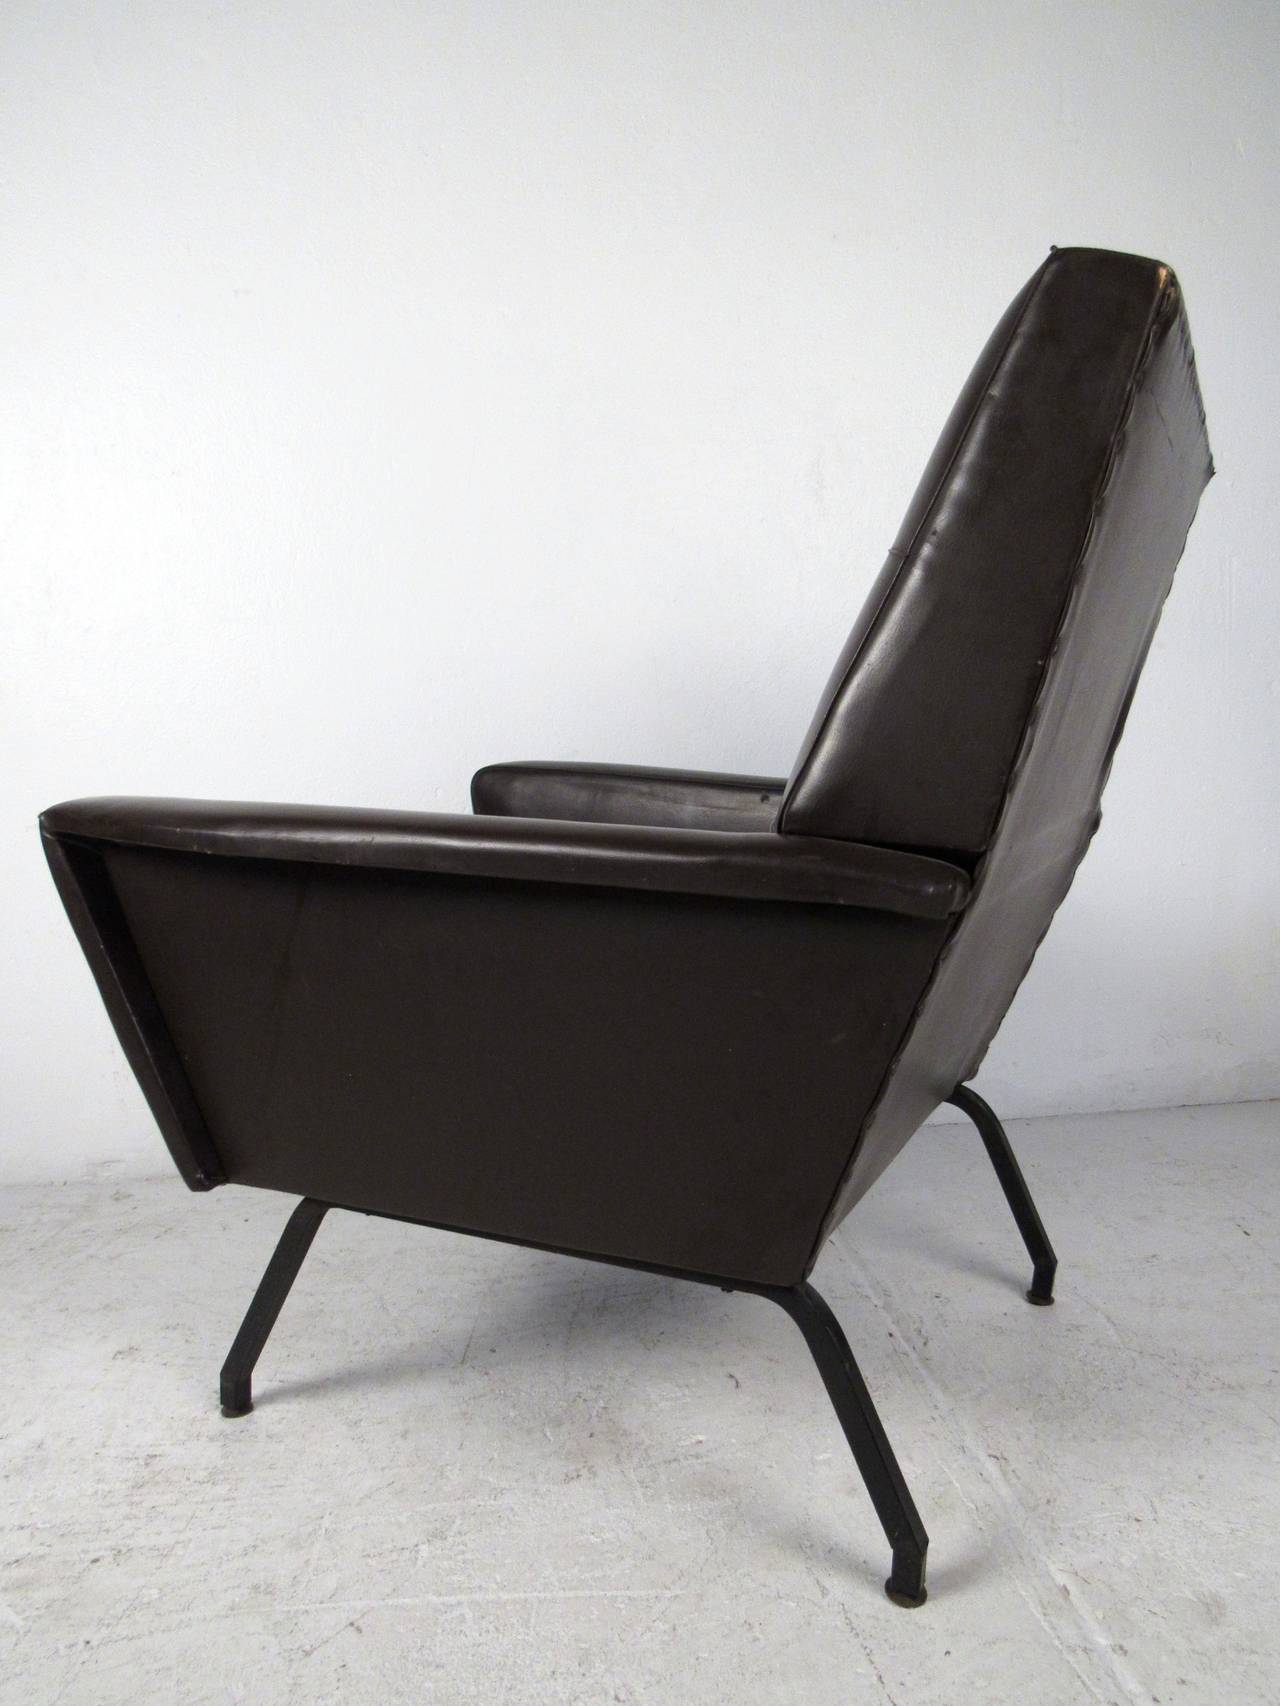 20th Century Mid-Century Modern Brown Lounge Chair with Two Buttons